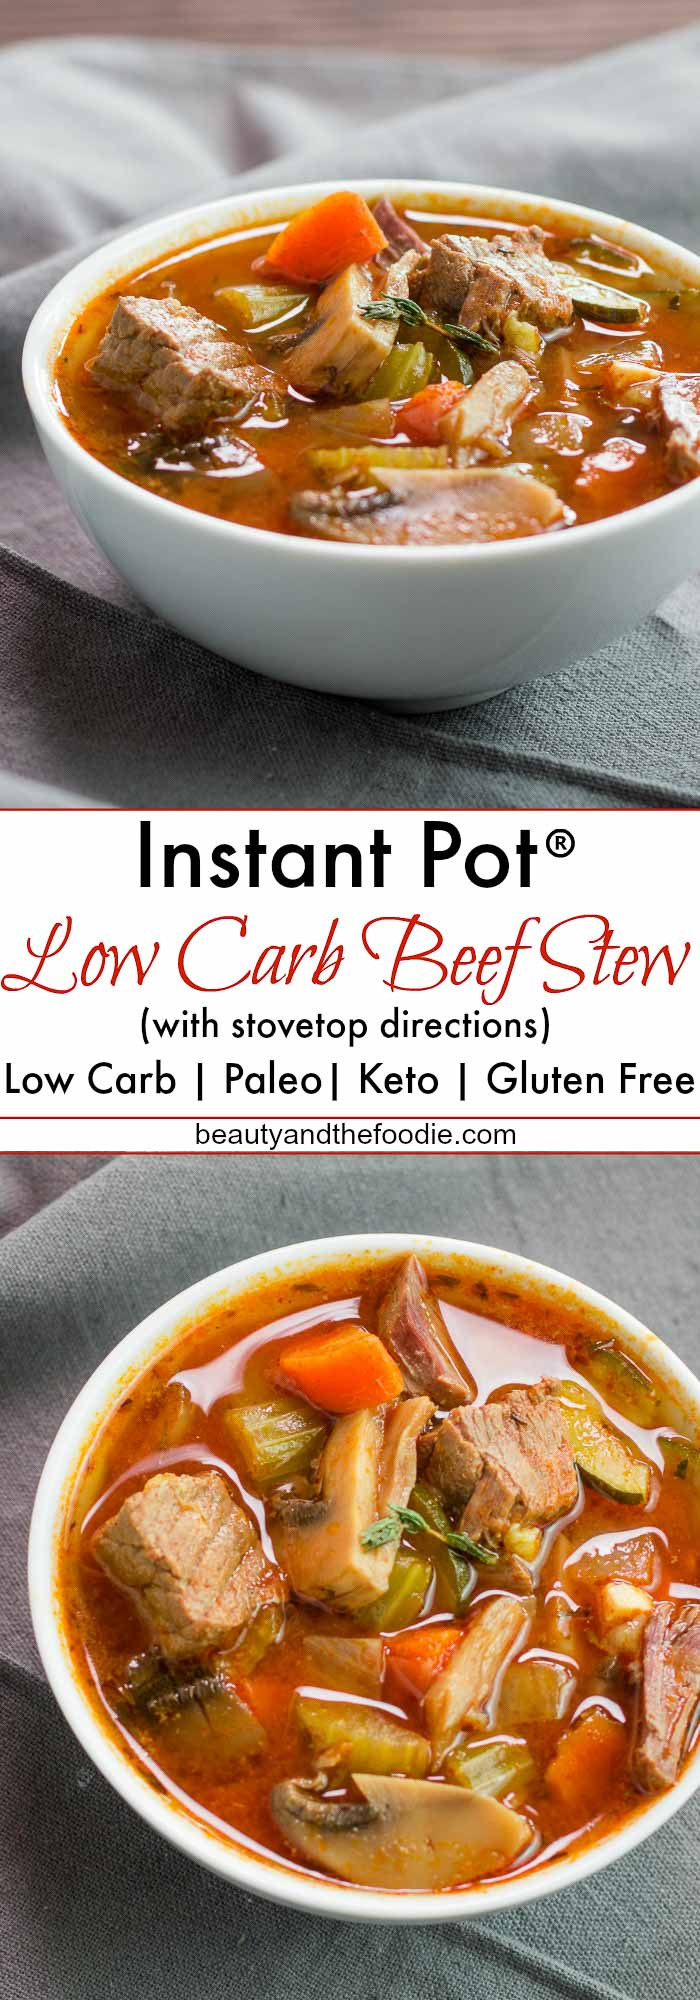 Low Carb Beef Stew
 Low Carb Instant Pot or Stovetop Hearty Beef Stew